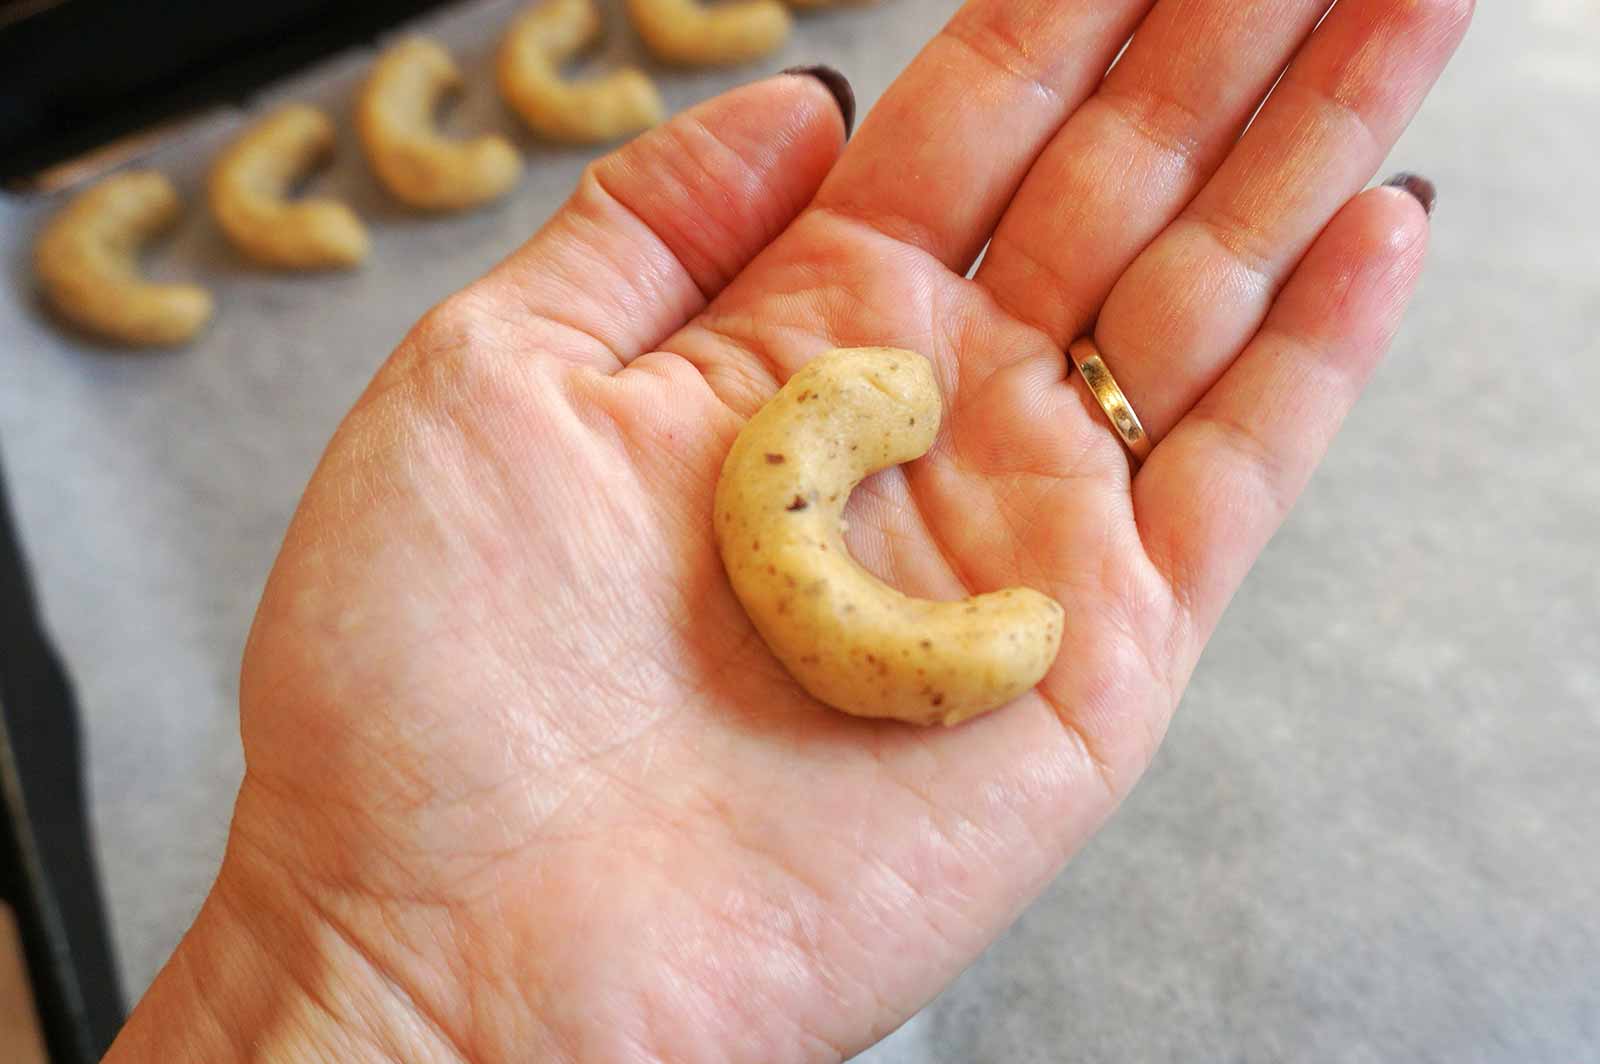 Vanilla walnut crescents are delicious and easy to make cookies. They are prepared with a few ingredients, and the result is delicious and fragrant sweets melting in the mouth. If you choose, you can make them in a different shape or size, and you can replace the walnuts with another type of nuts such as almonds. 